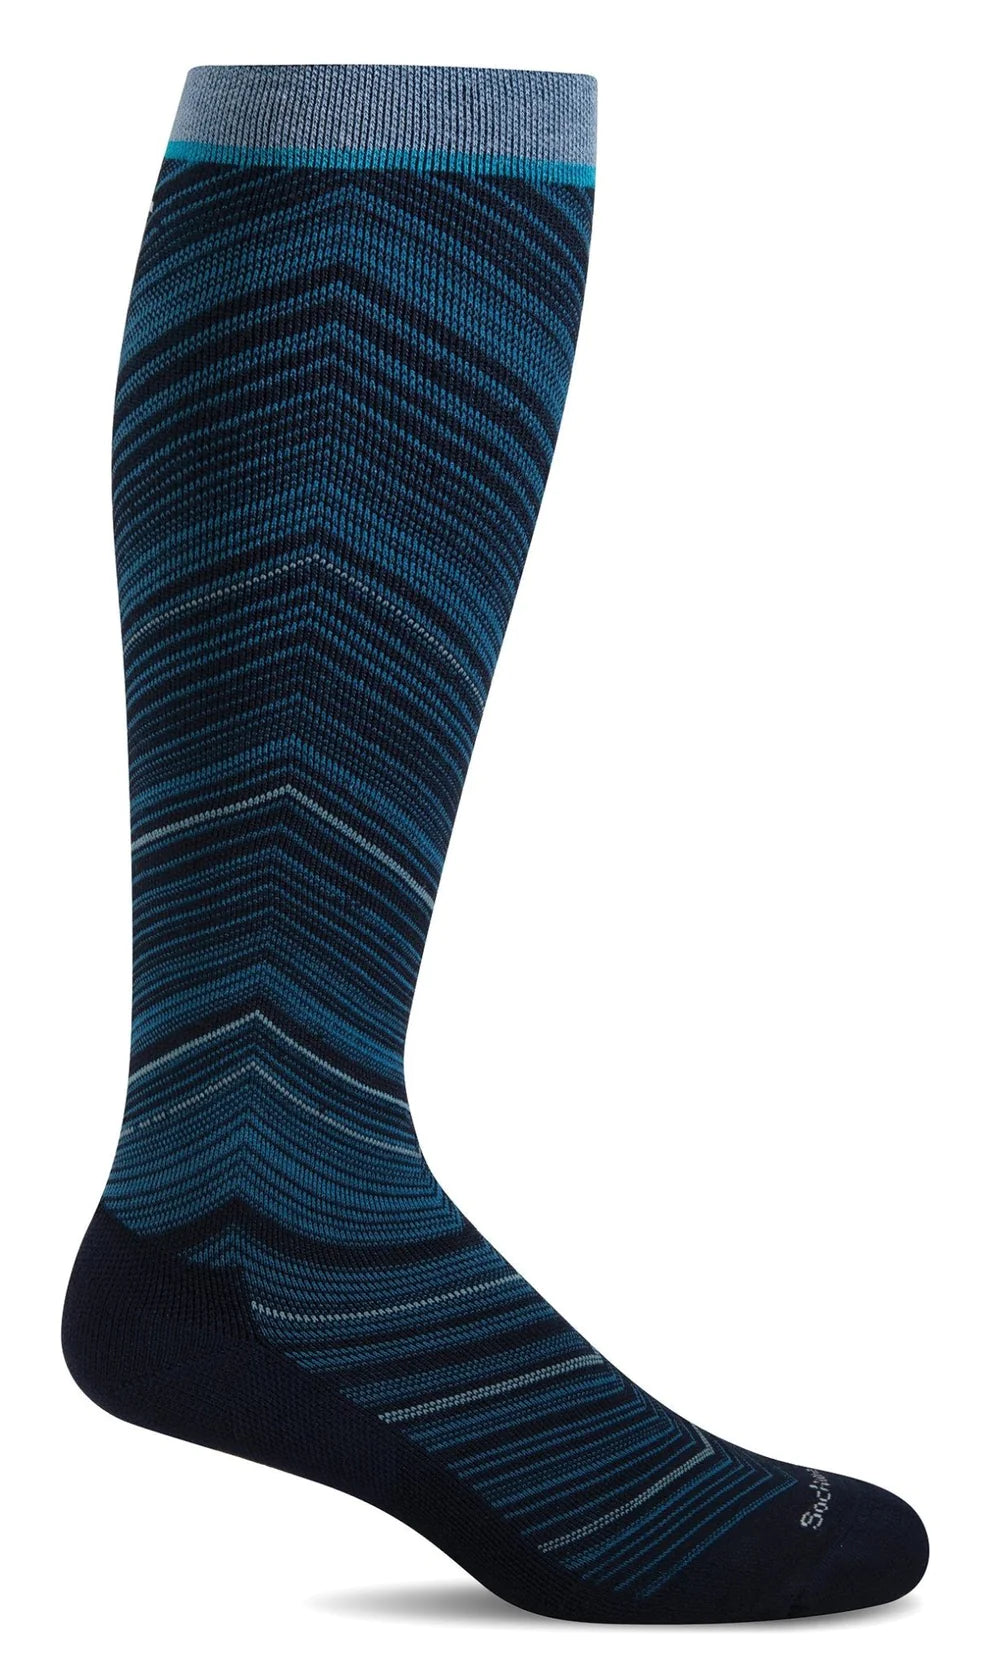 SOCKWELL WOMEN'S FULL FLATTERY - MODERATE GRADUATED COMPRESSION SOCKS WIDE CALF FIT - NAVY